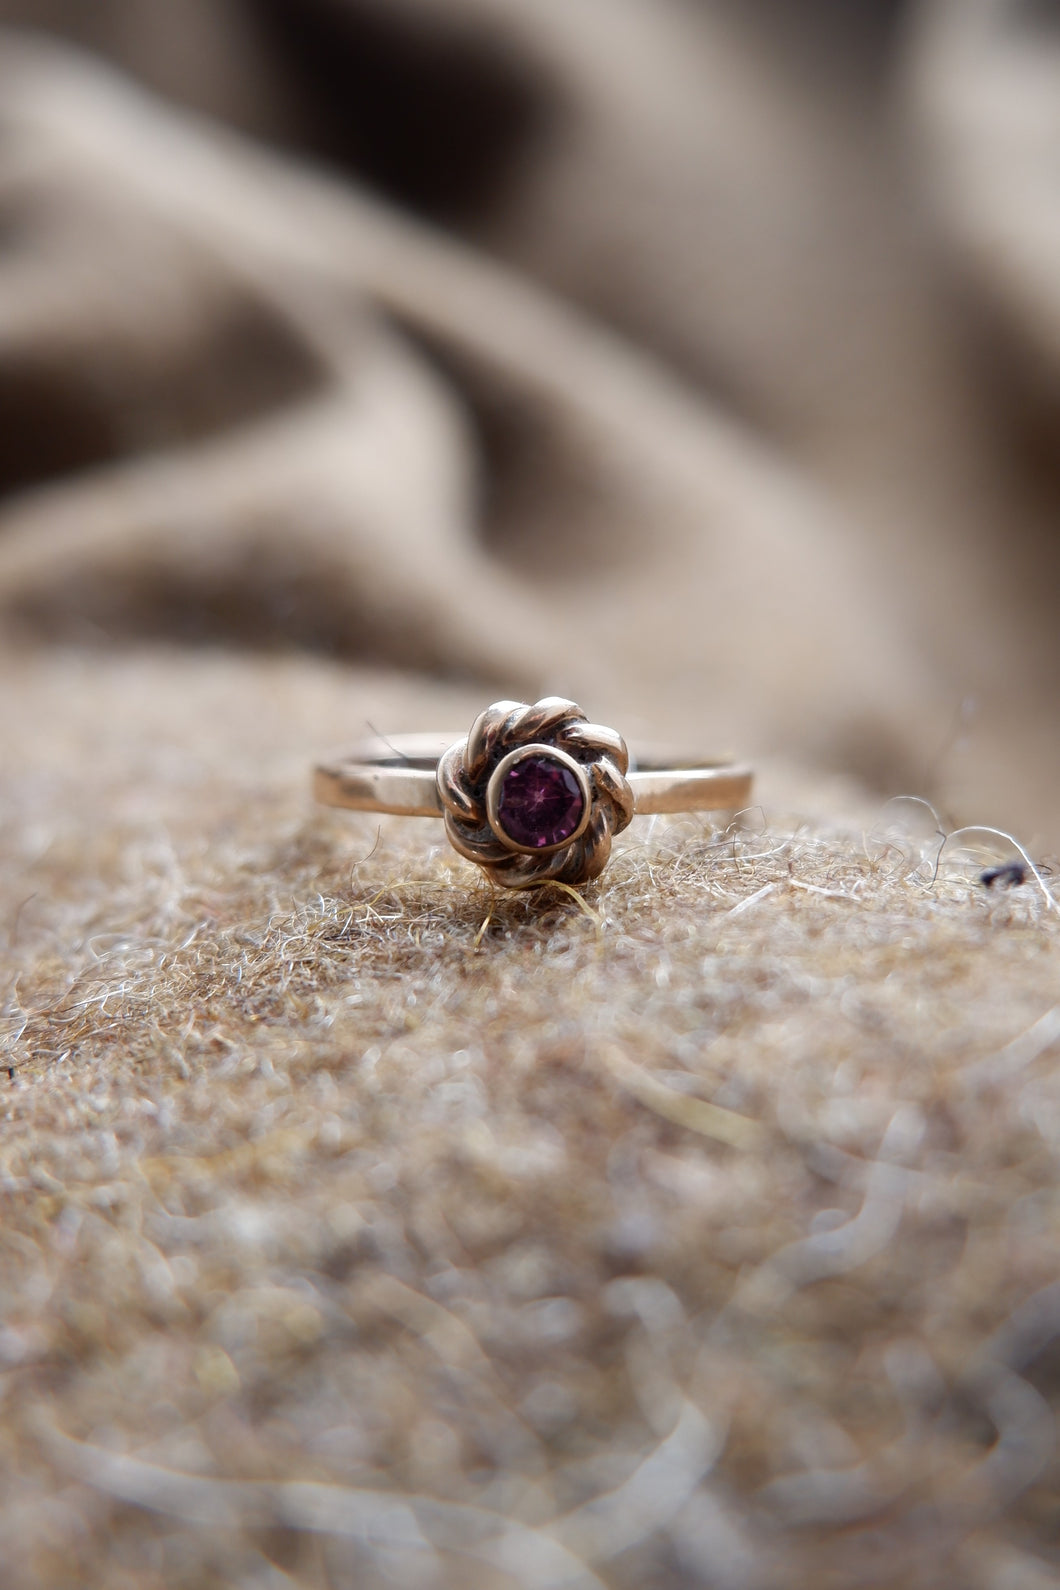 Gold and garnet Anglo Saxon style ring